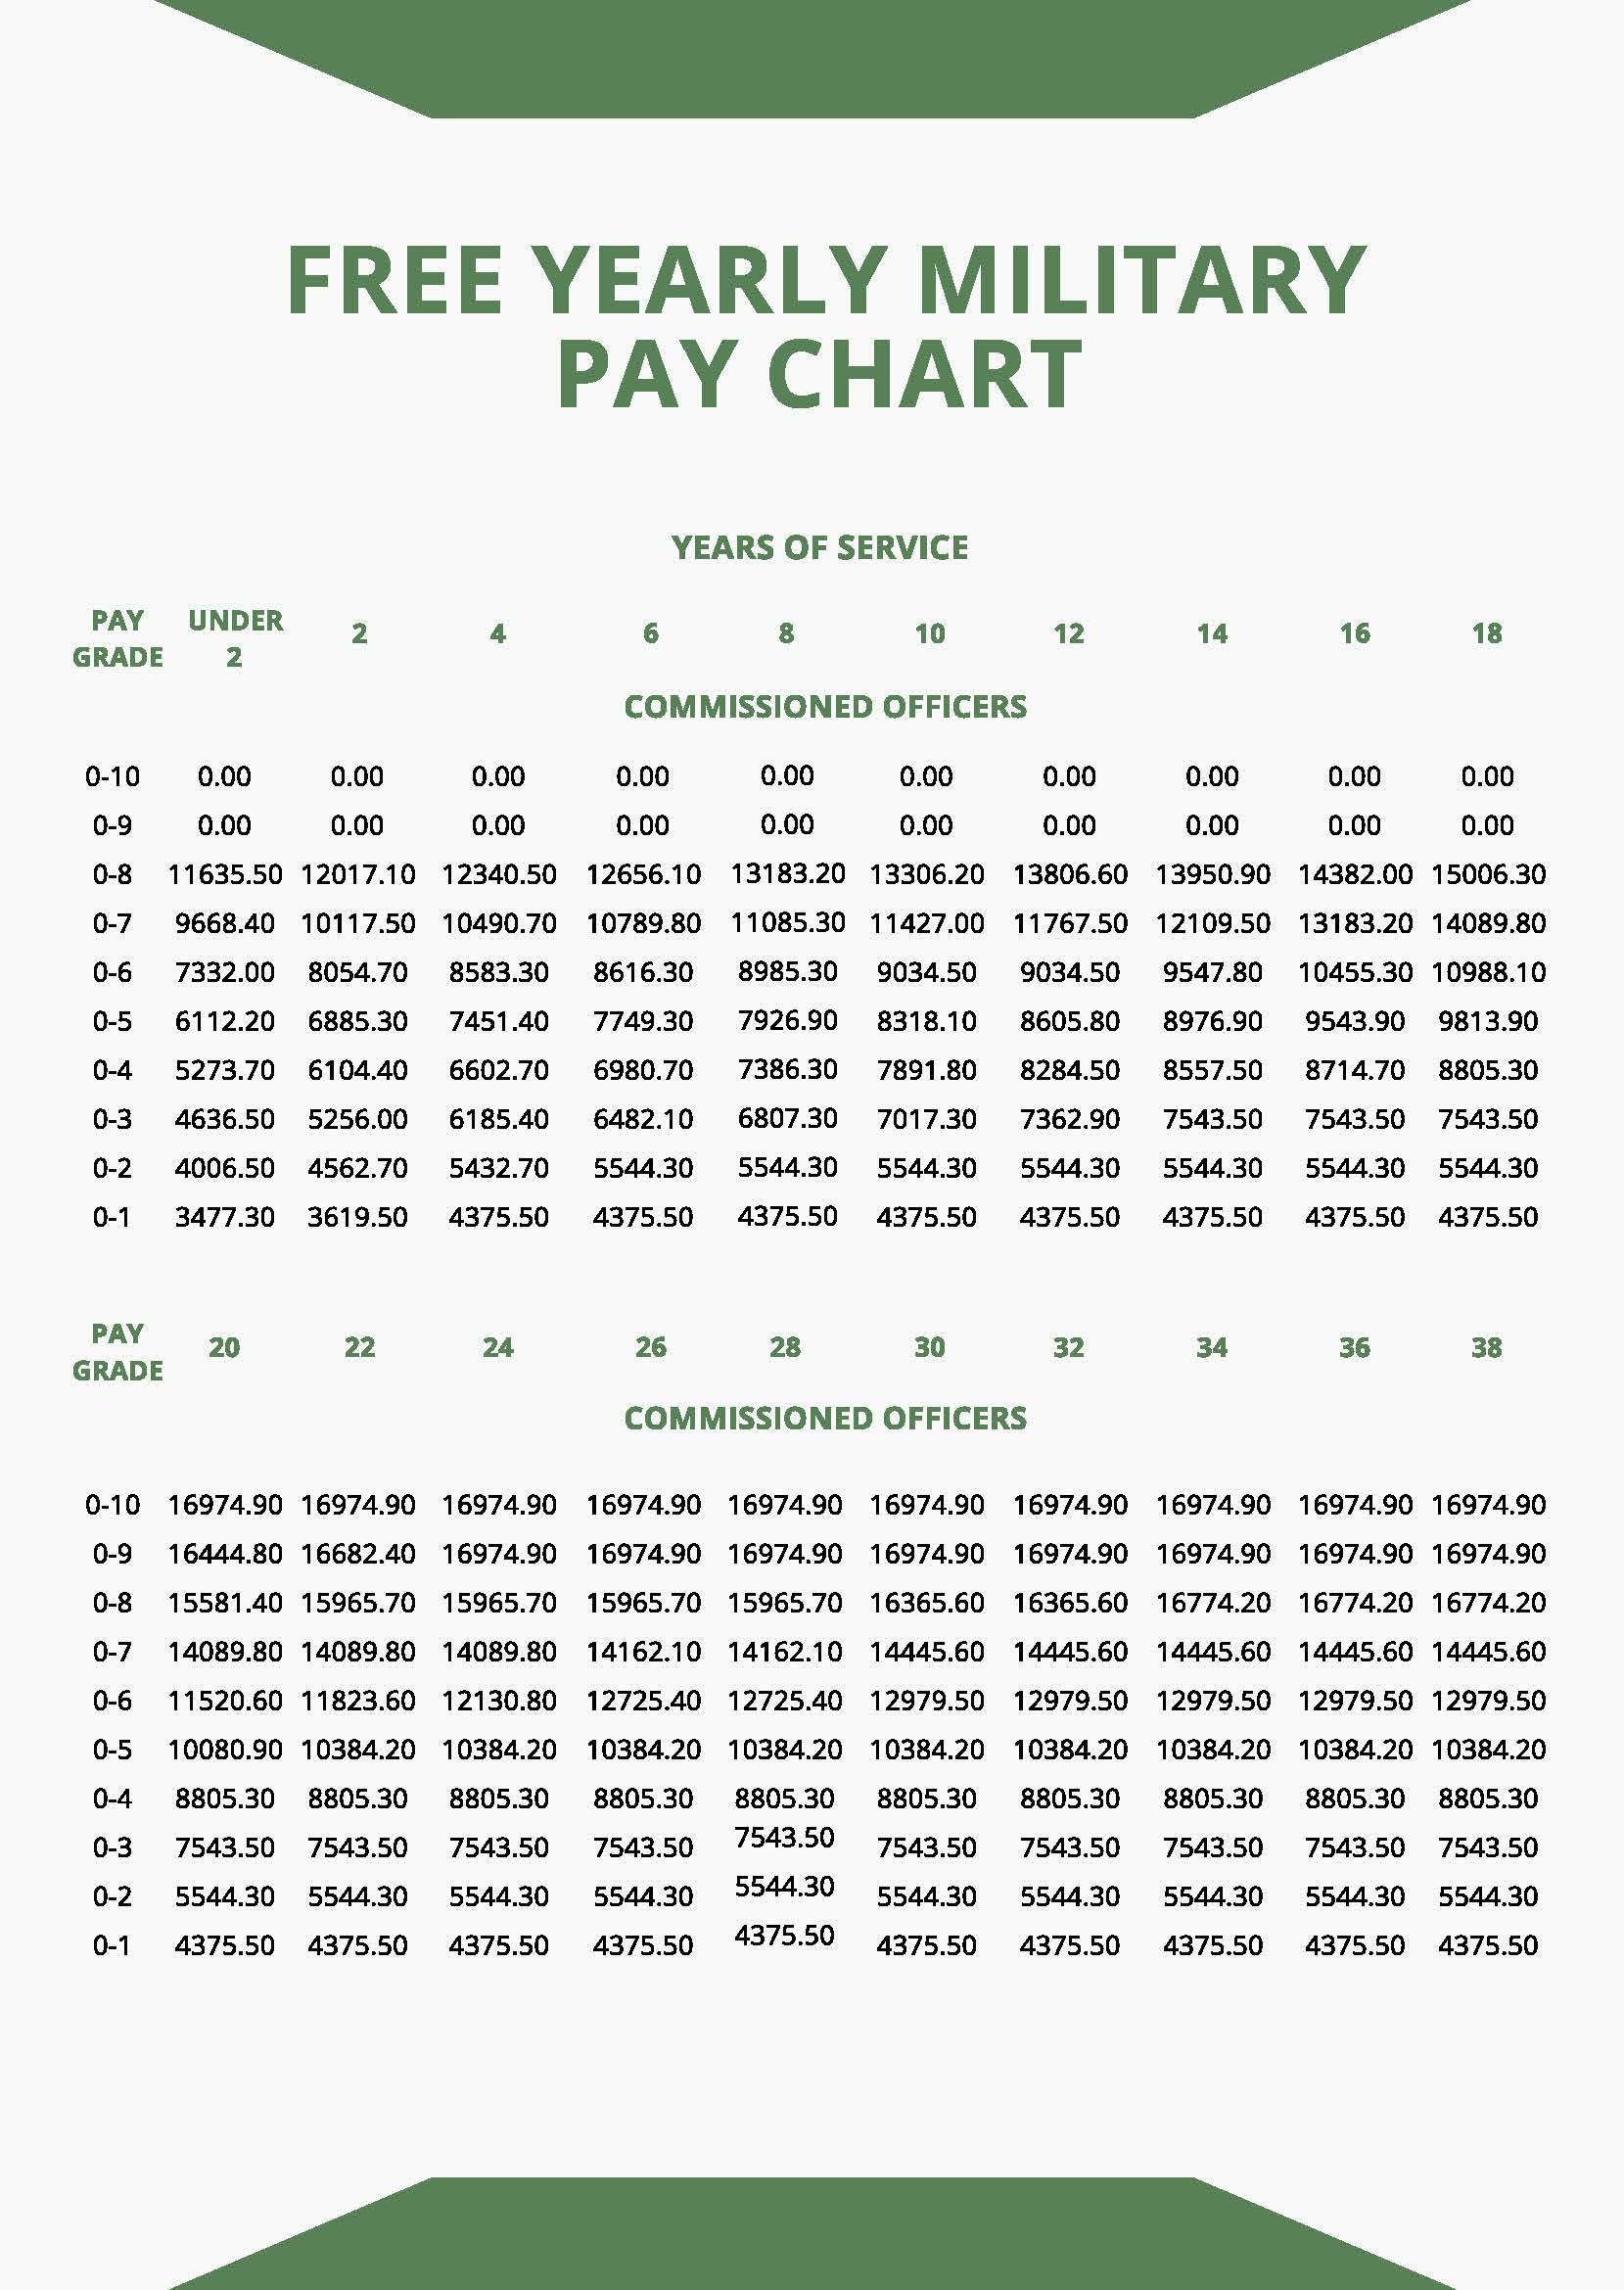 Free Yearly Military Pay Chart